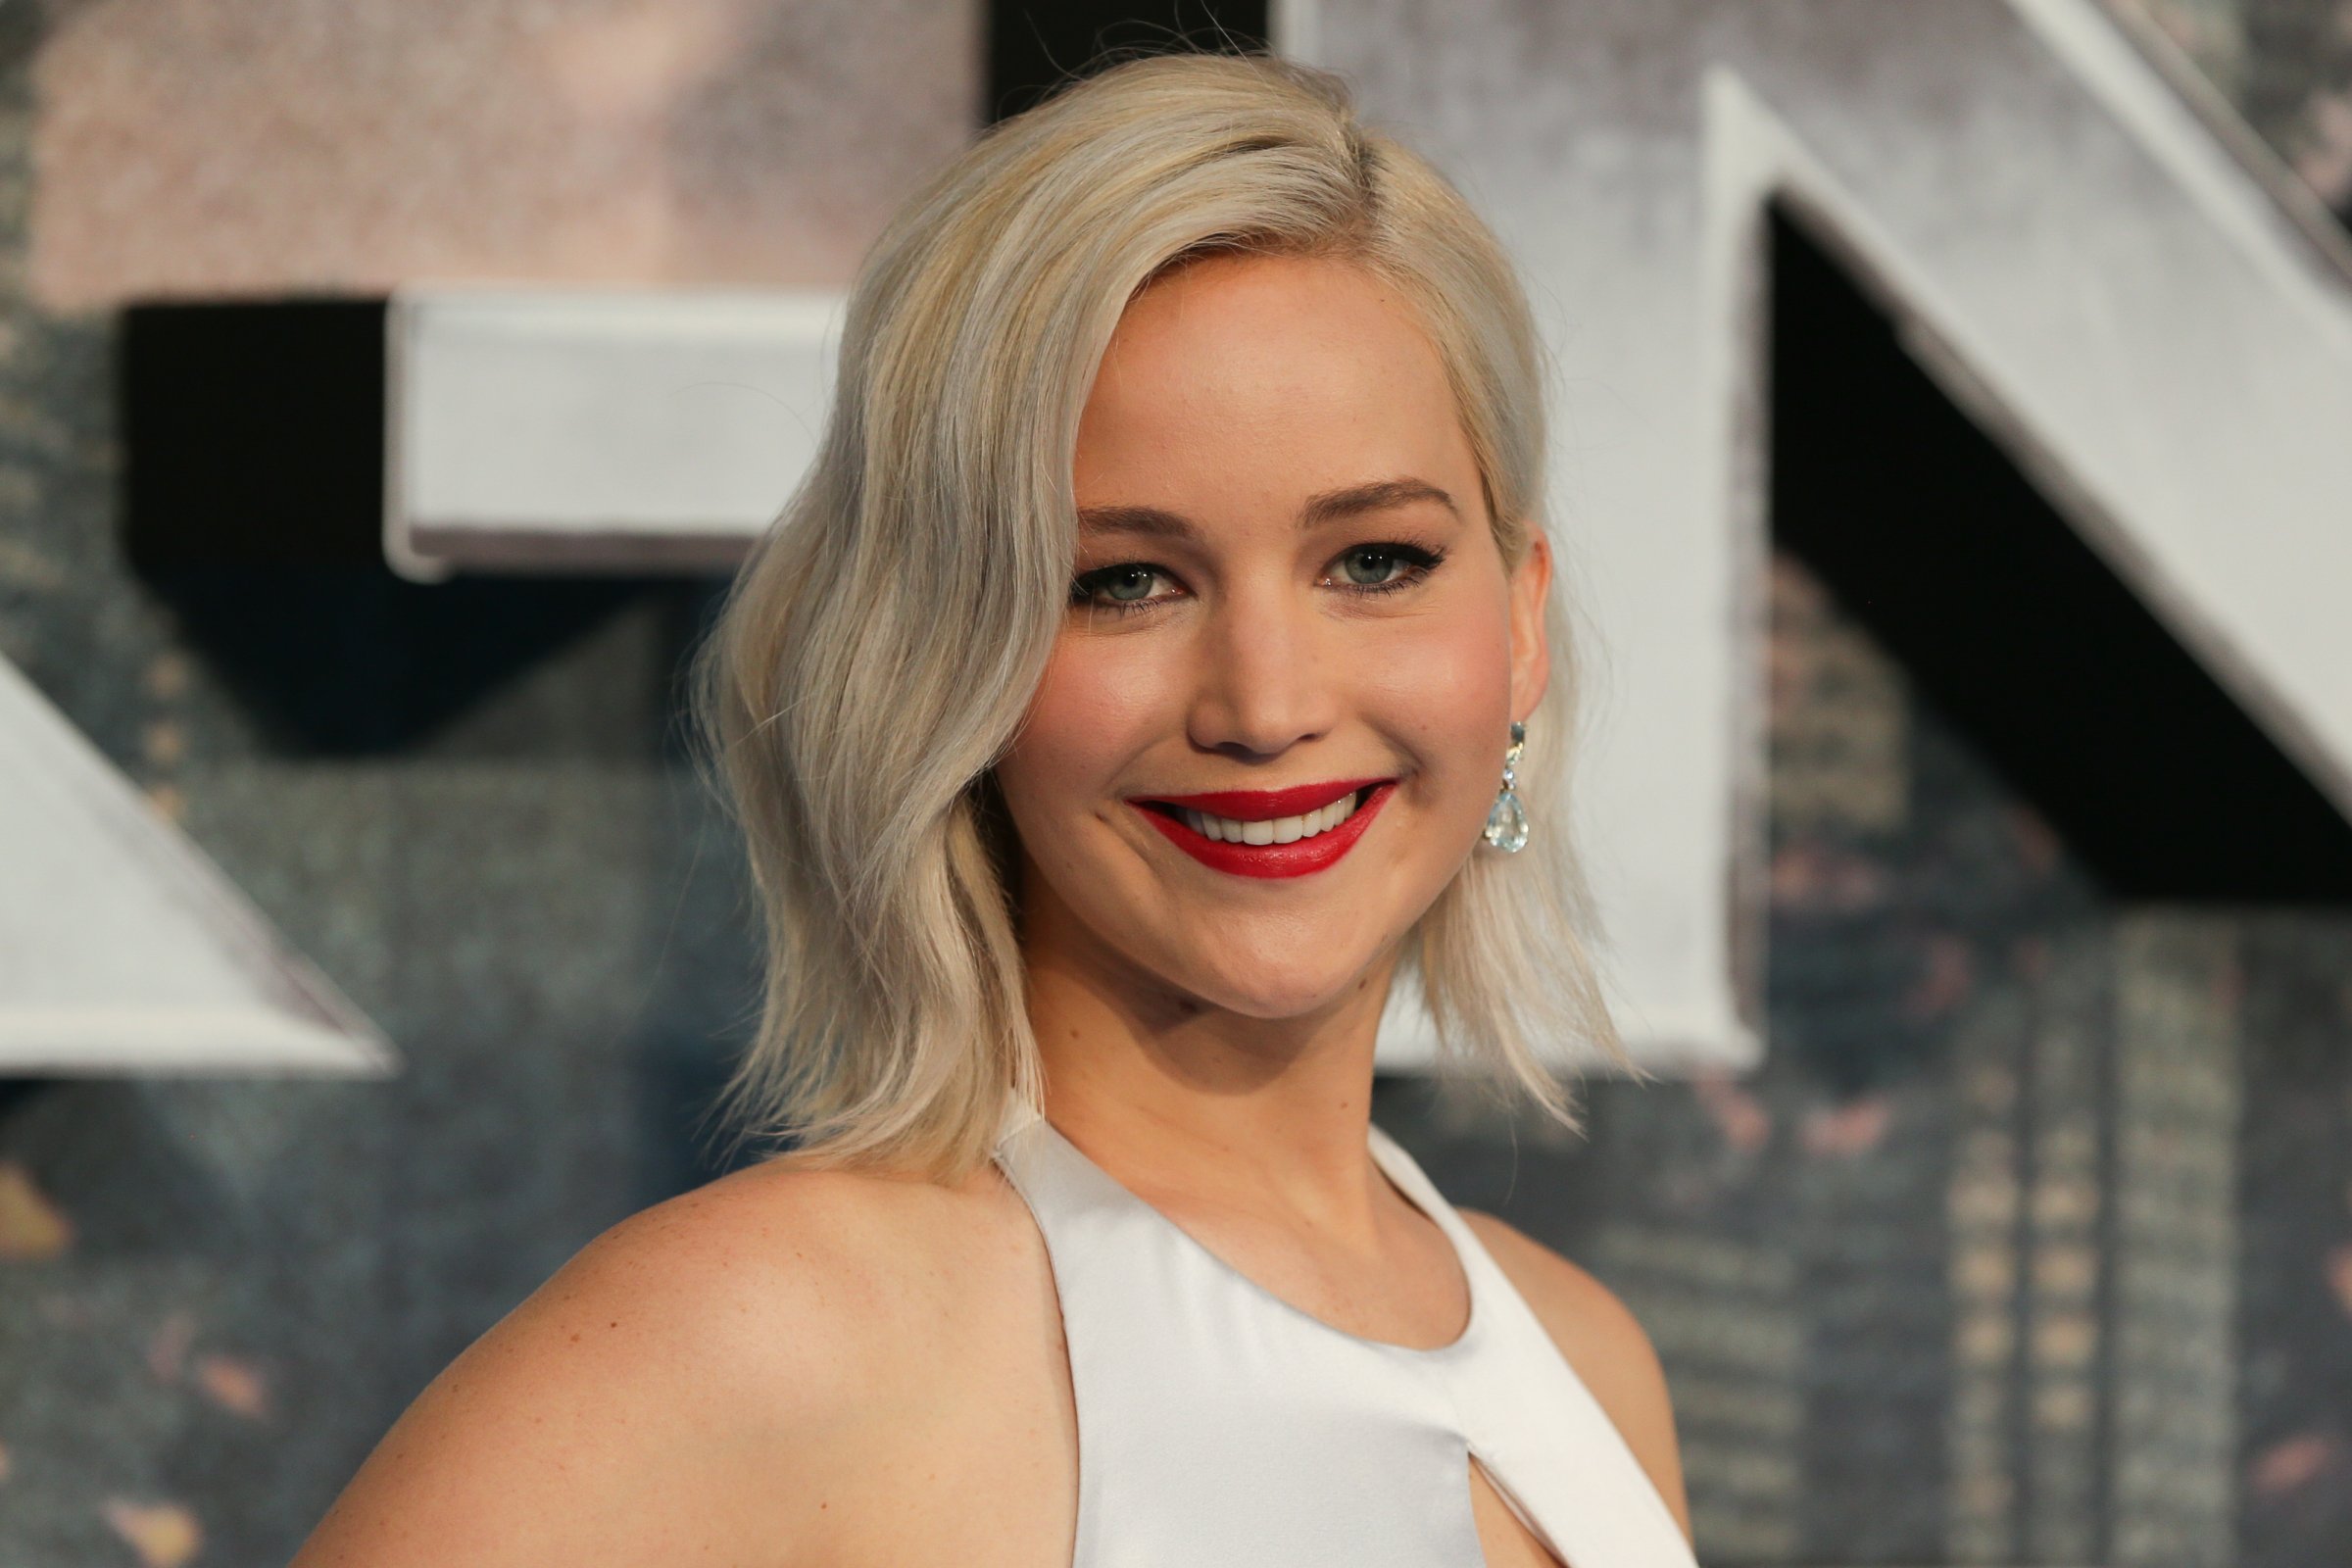 US actress Jennifer Lawrence poses on arrival for the premiere of X-Men Apocalypse in central London on May 9, 2016.